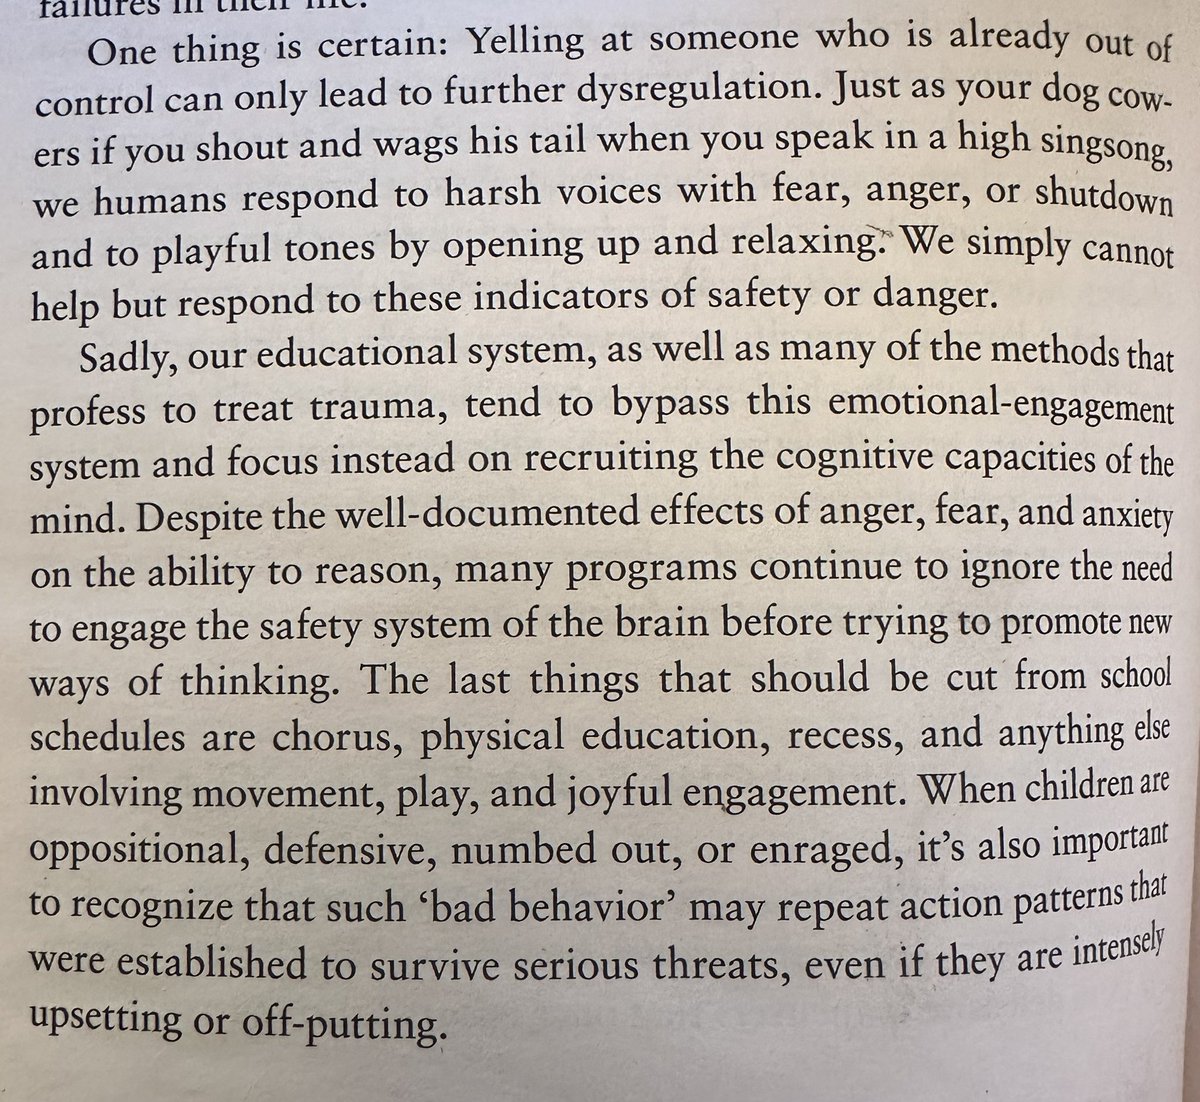 “One thing is certain: Yelling at someone who is already out of control can only lead to further dysregulation.” 

Bessel van der Kolk 
“The Body Keeps the Score”

#emotions #trauma #ptsd #anxiety #behaviour #thebrain #limbicsystem #polyvagaltheory #education #support #ANS